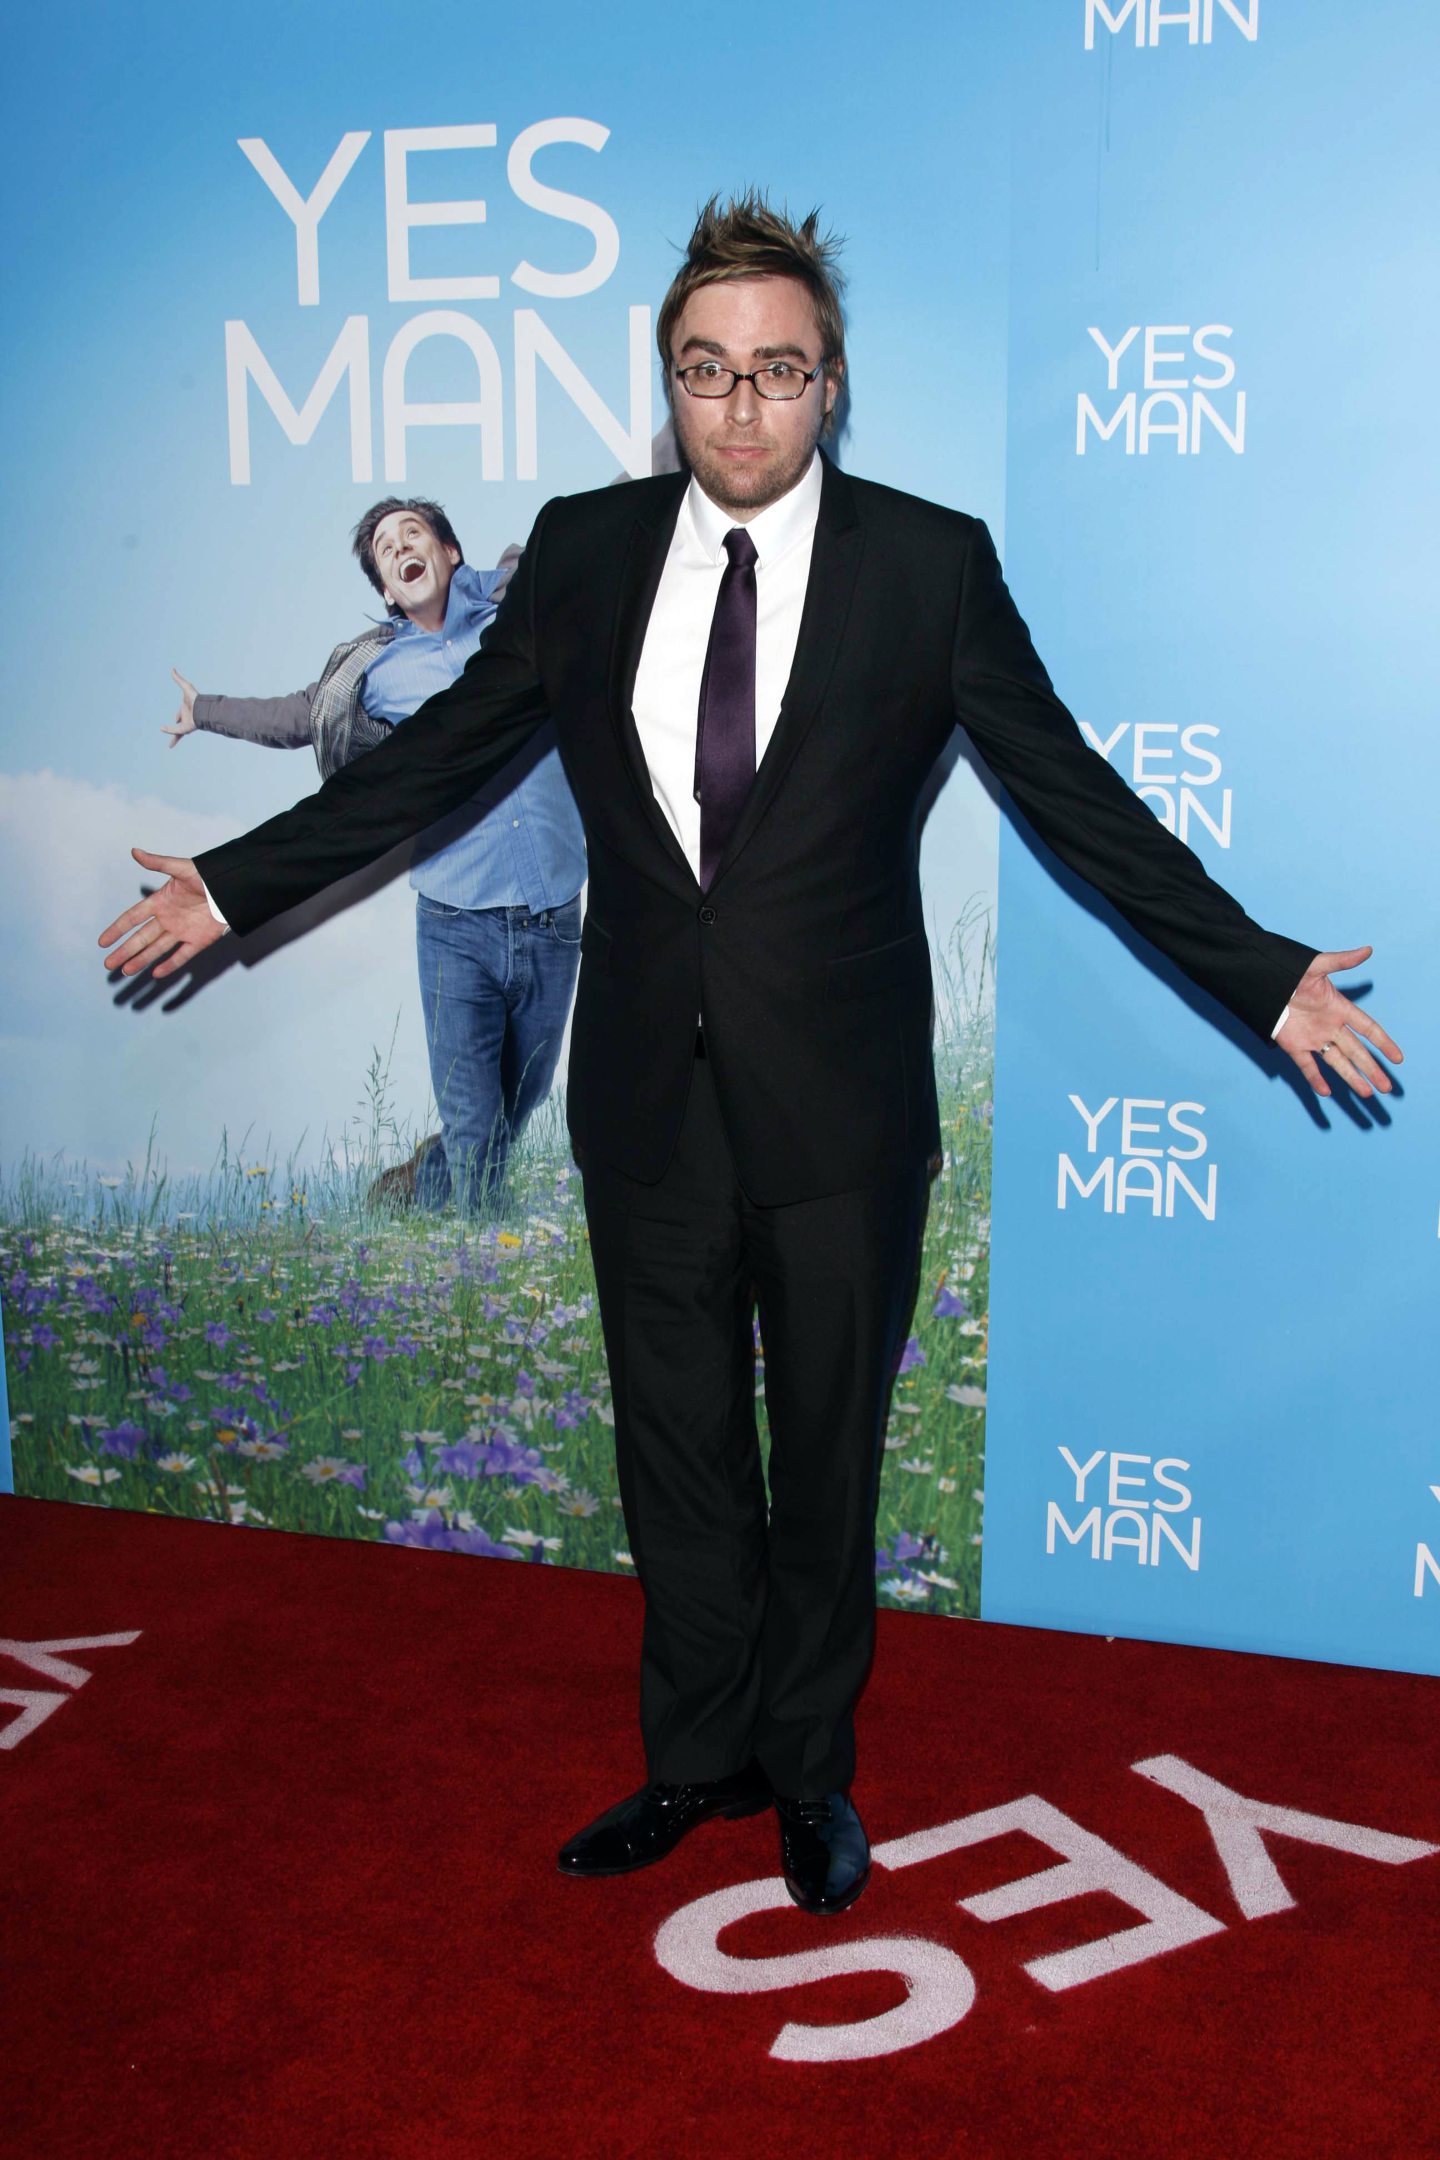 Dundonian writer Danny Wallace on the red carpet for the premiere of Yes Man